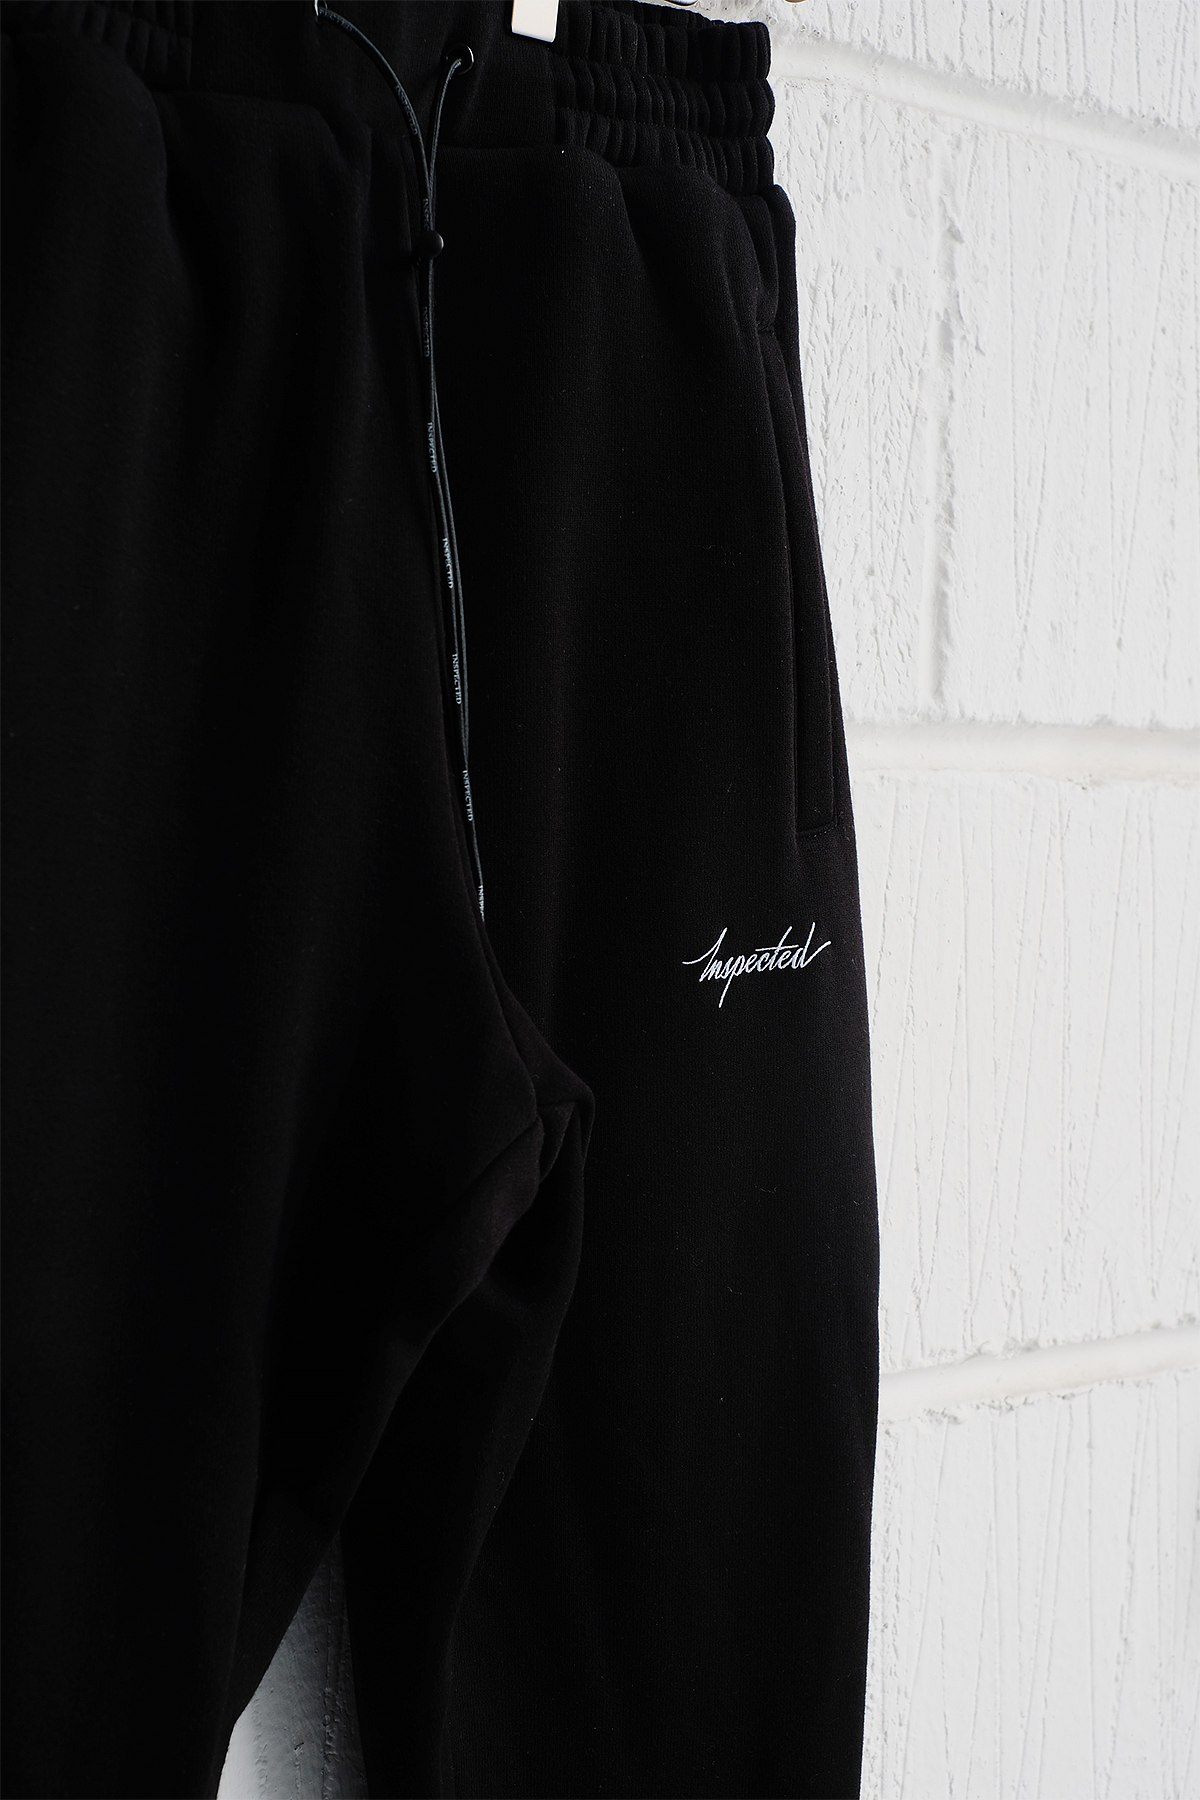 SAMPLE PANTS — REMASTERED (SMALL LOGO) – Inspected